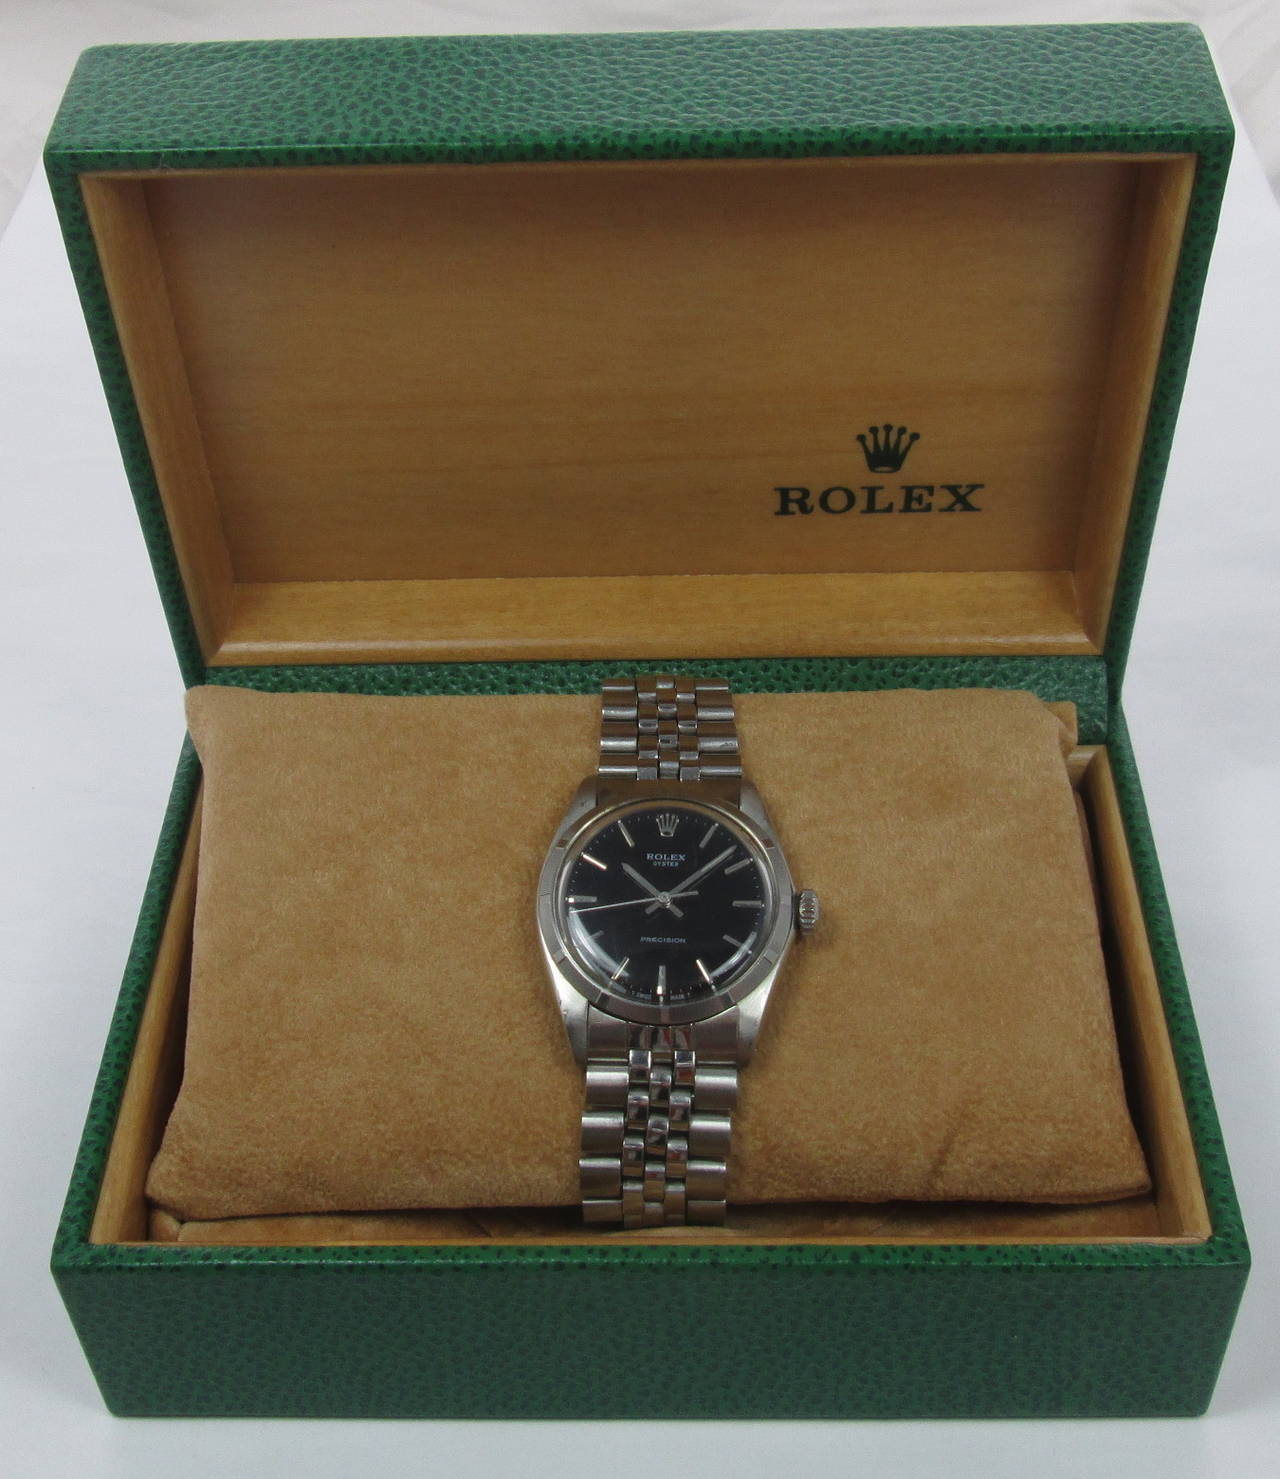 Rolex. A stainless steel water-resistant wristwatch with sweep center seconds and black dial. Signed Rolex, Oyster, Ref. 6426/6427, circa 1967. With nickel-finished lever movement, 17 jewels, the black dial with applied baton indexes, sweep center